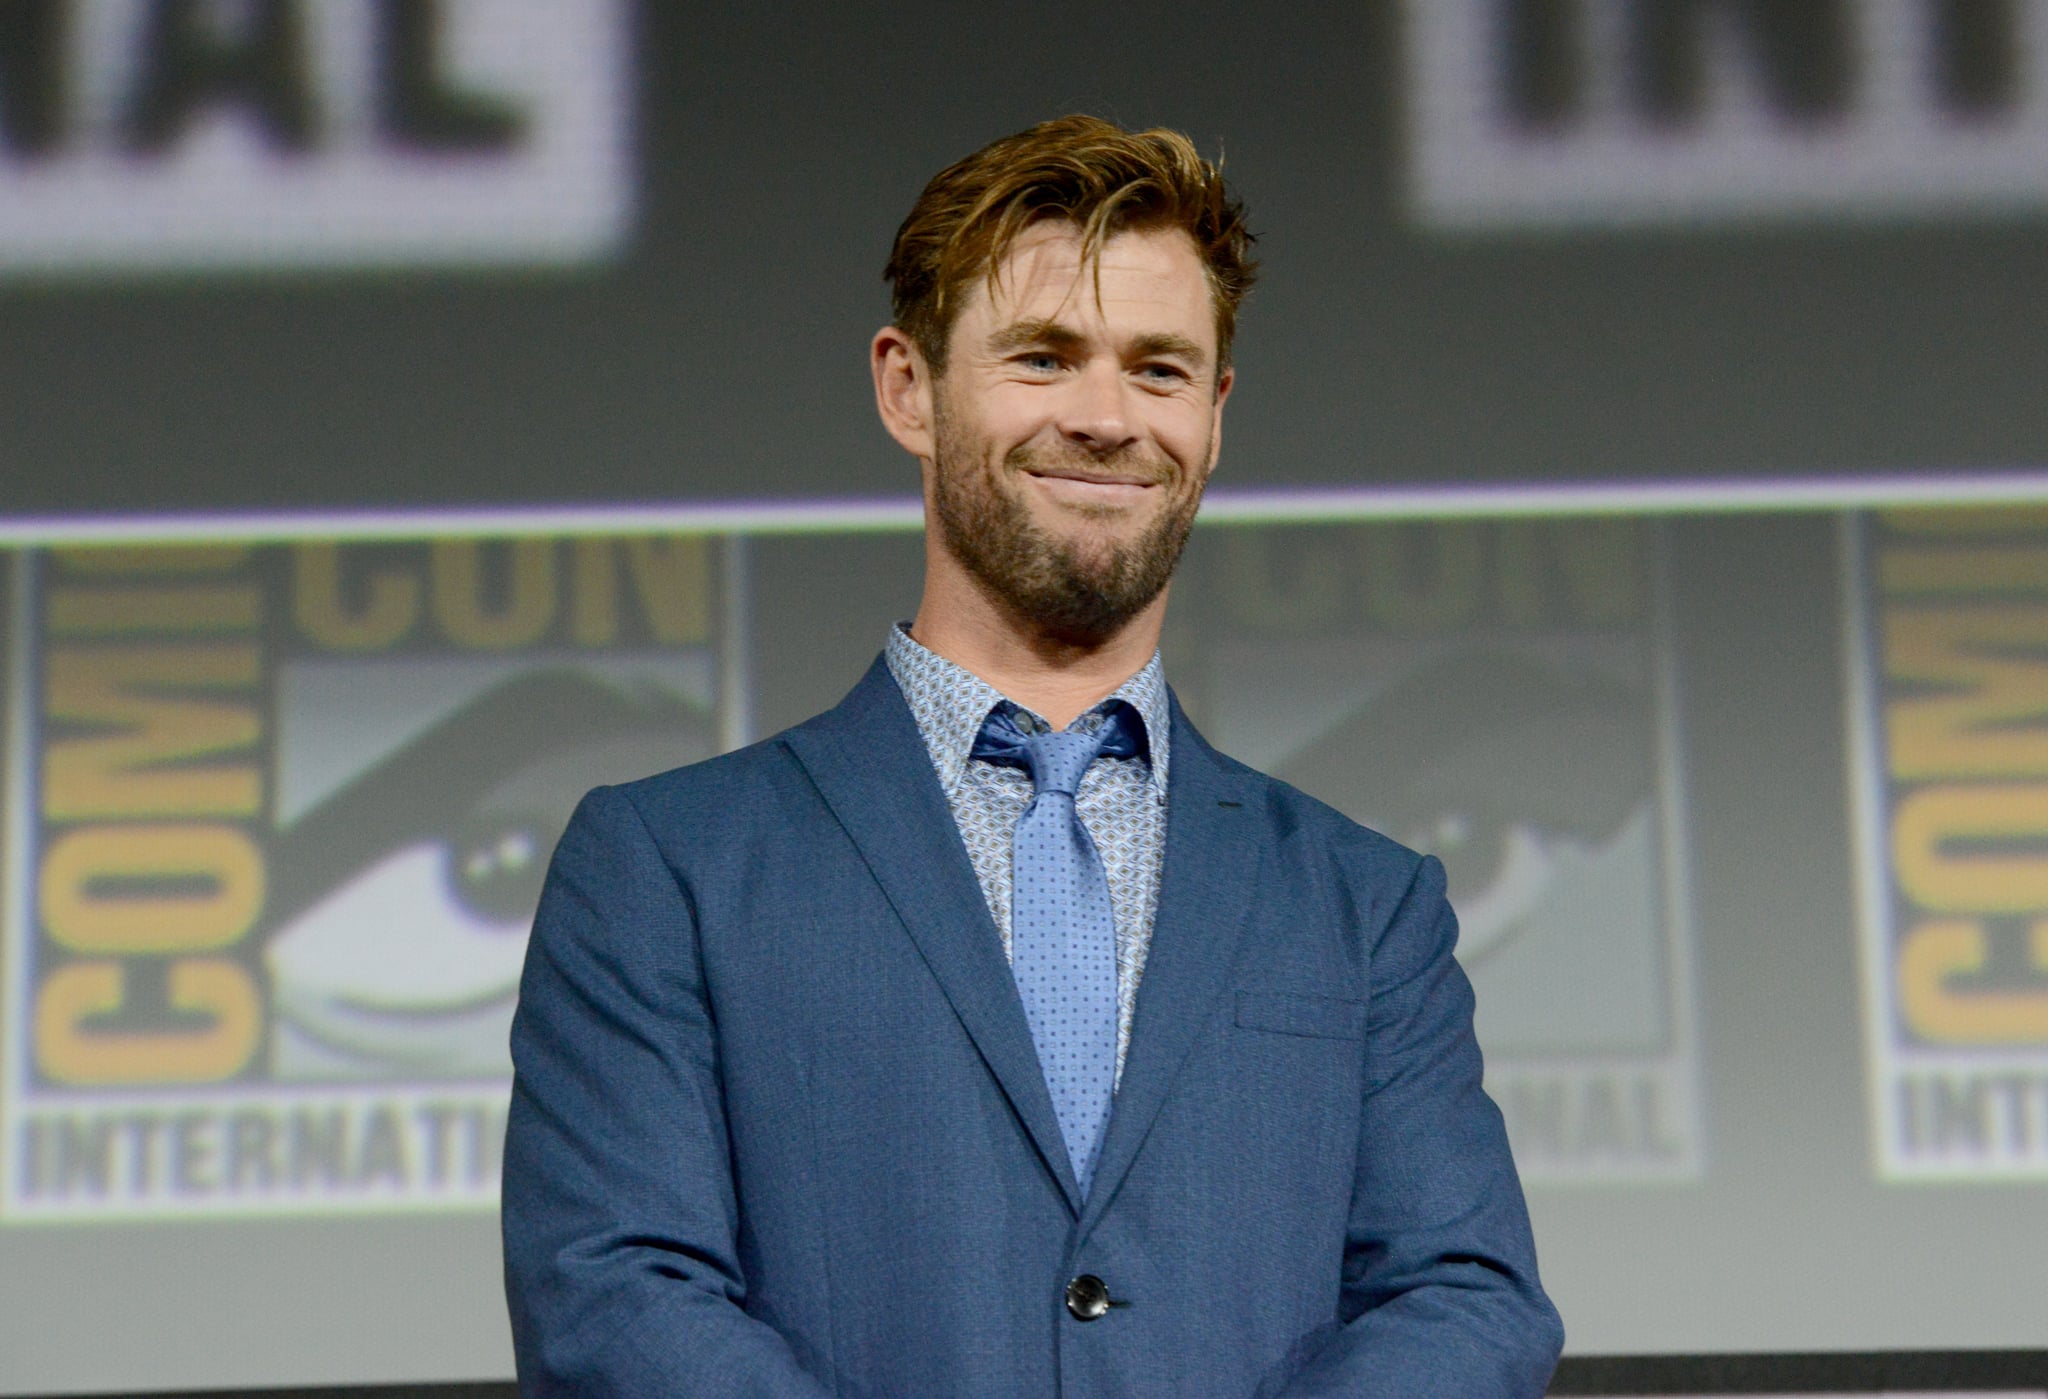 SAN DIEGO, CALIFORNIA - JULY 20: Chris Hemsworth speaks at the Marvel Studios Panel during 2019 Comic-Con International at San Diego Convention Center on July 20, 2019 in San Diego, California. (Photo by Albert L. Ortega/Getty Images)